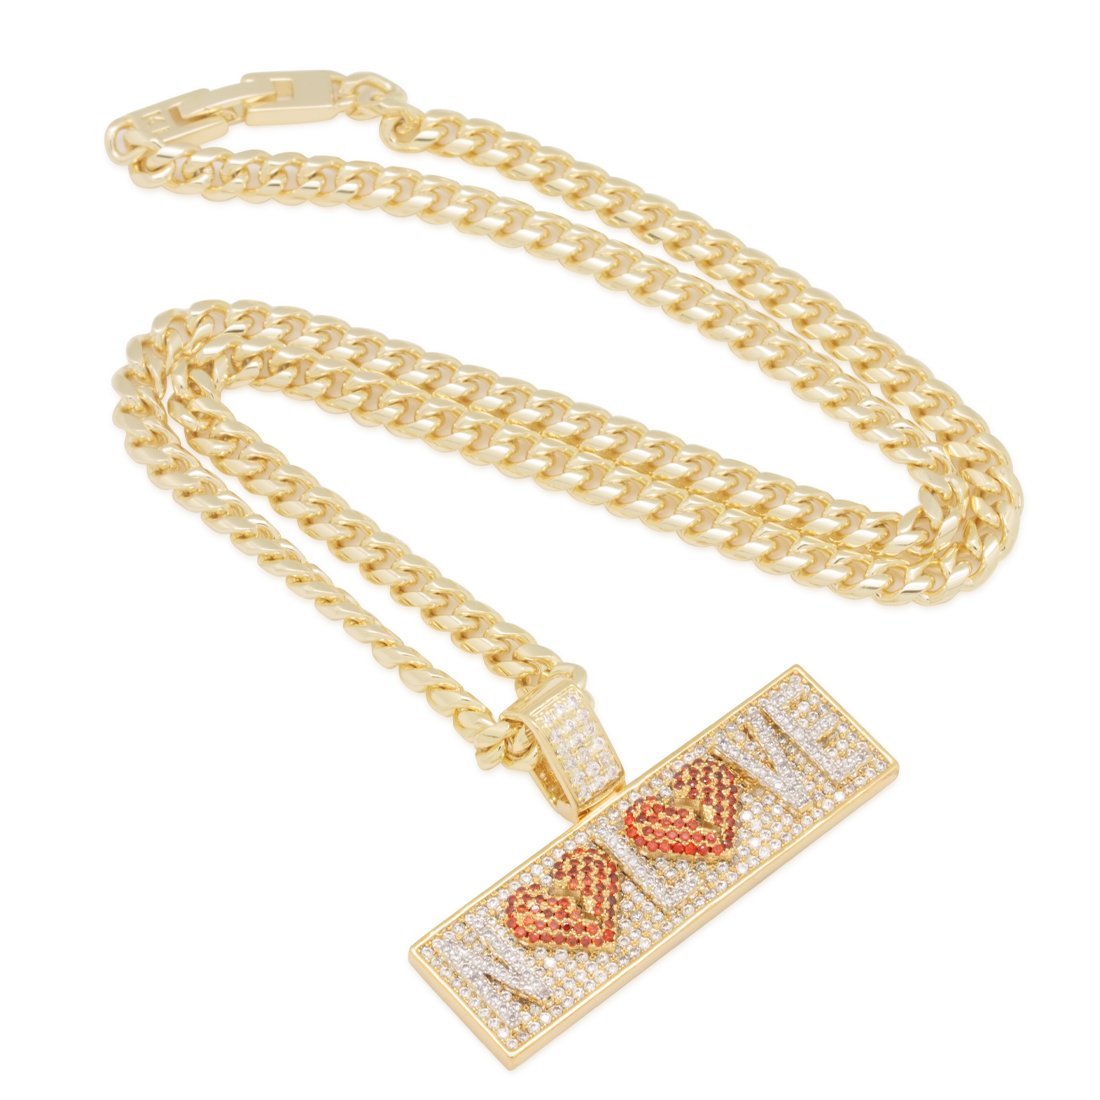 Drakesboutique - King Ice 14k Gold Plated NLE Choppa No Love Bar 